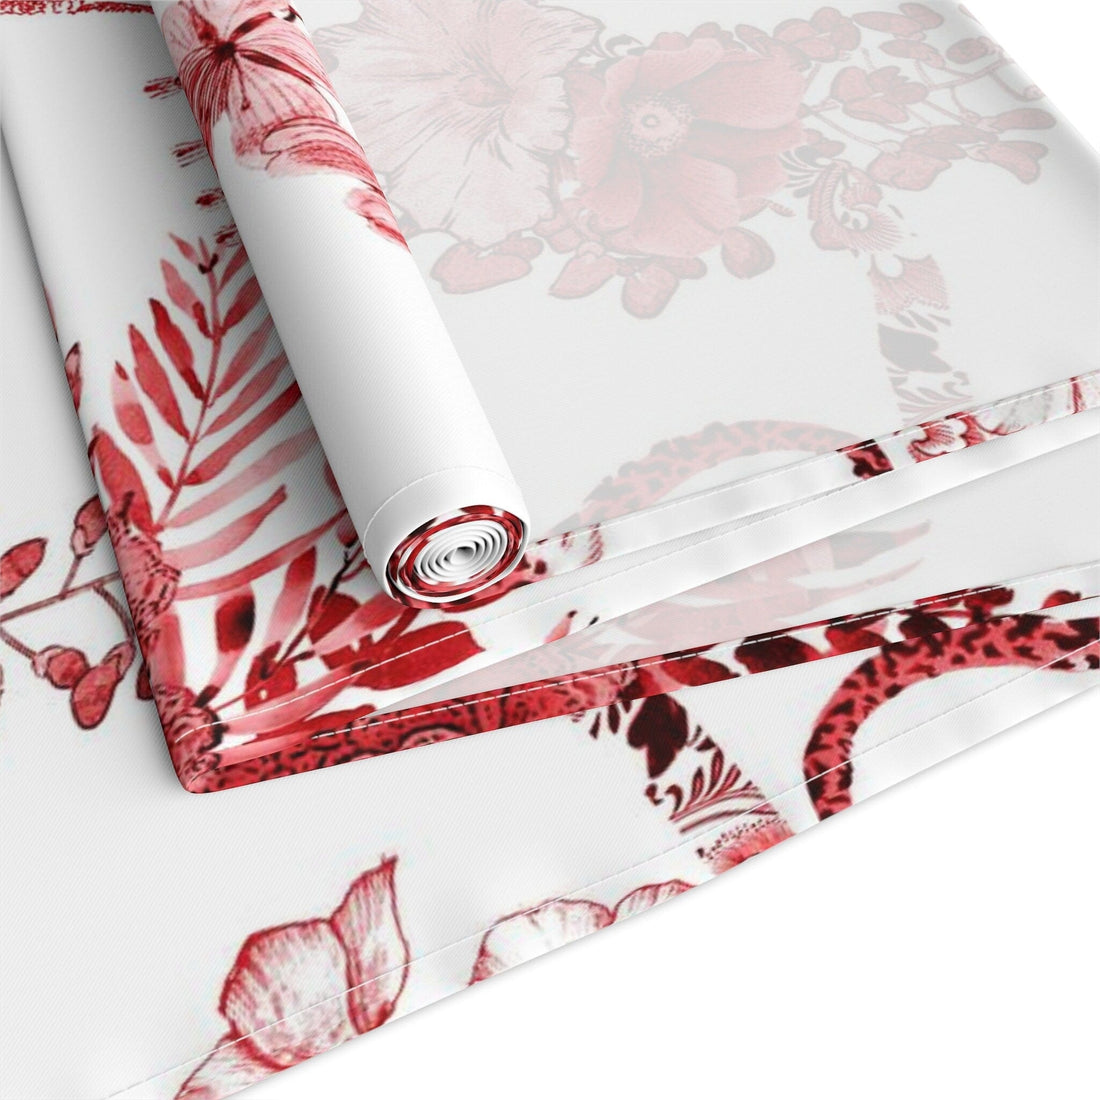 Kate McEnroe New York Chinoiserie Jungle Botanical Toile Table Runner, Red, White Chinoiserie Floral Table Linens , Country Farmhouse Table Decor - 131782623Table Runners24339001434271510791